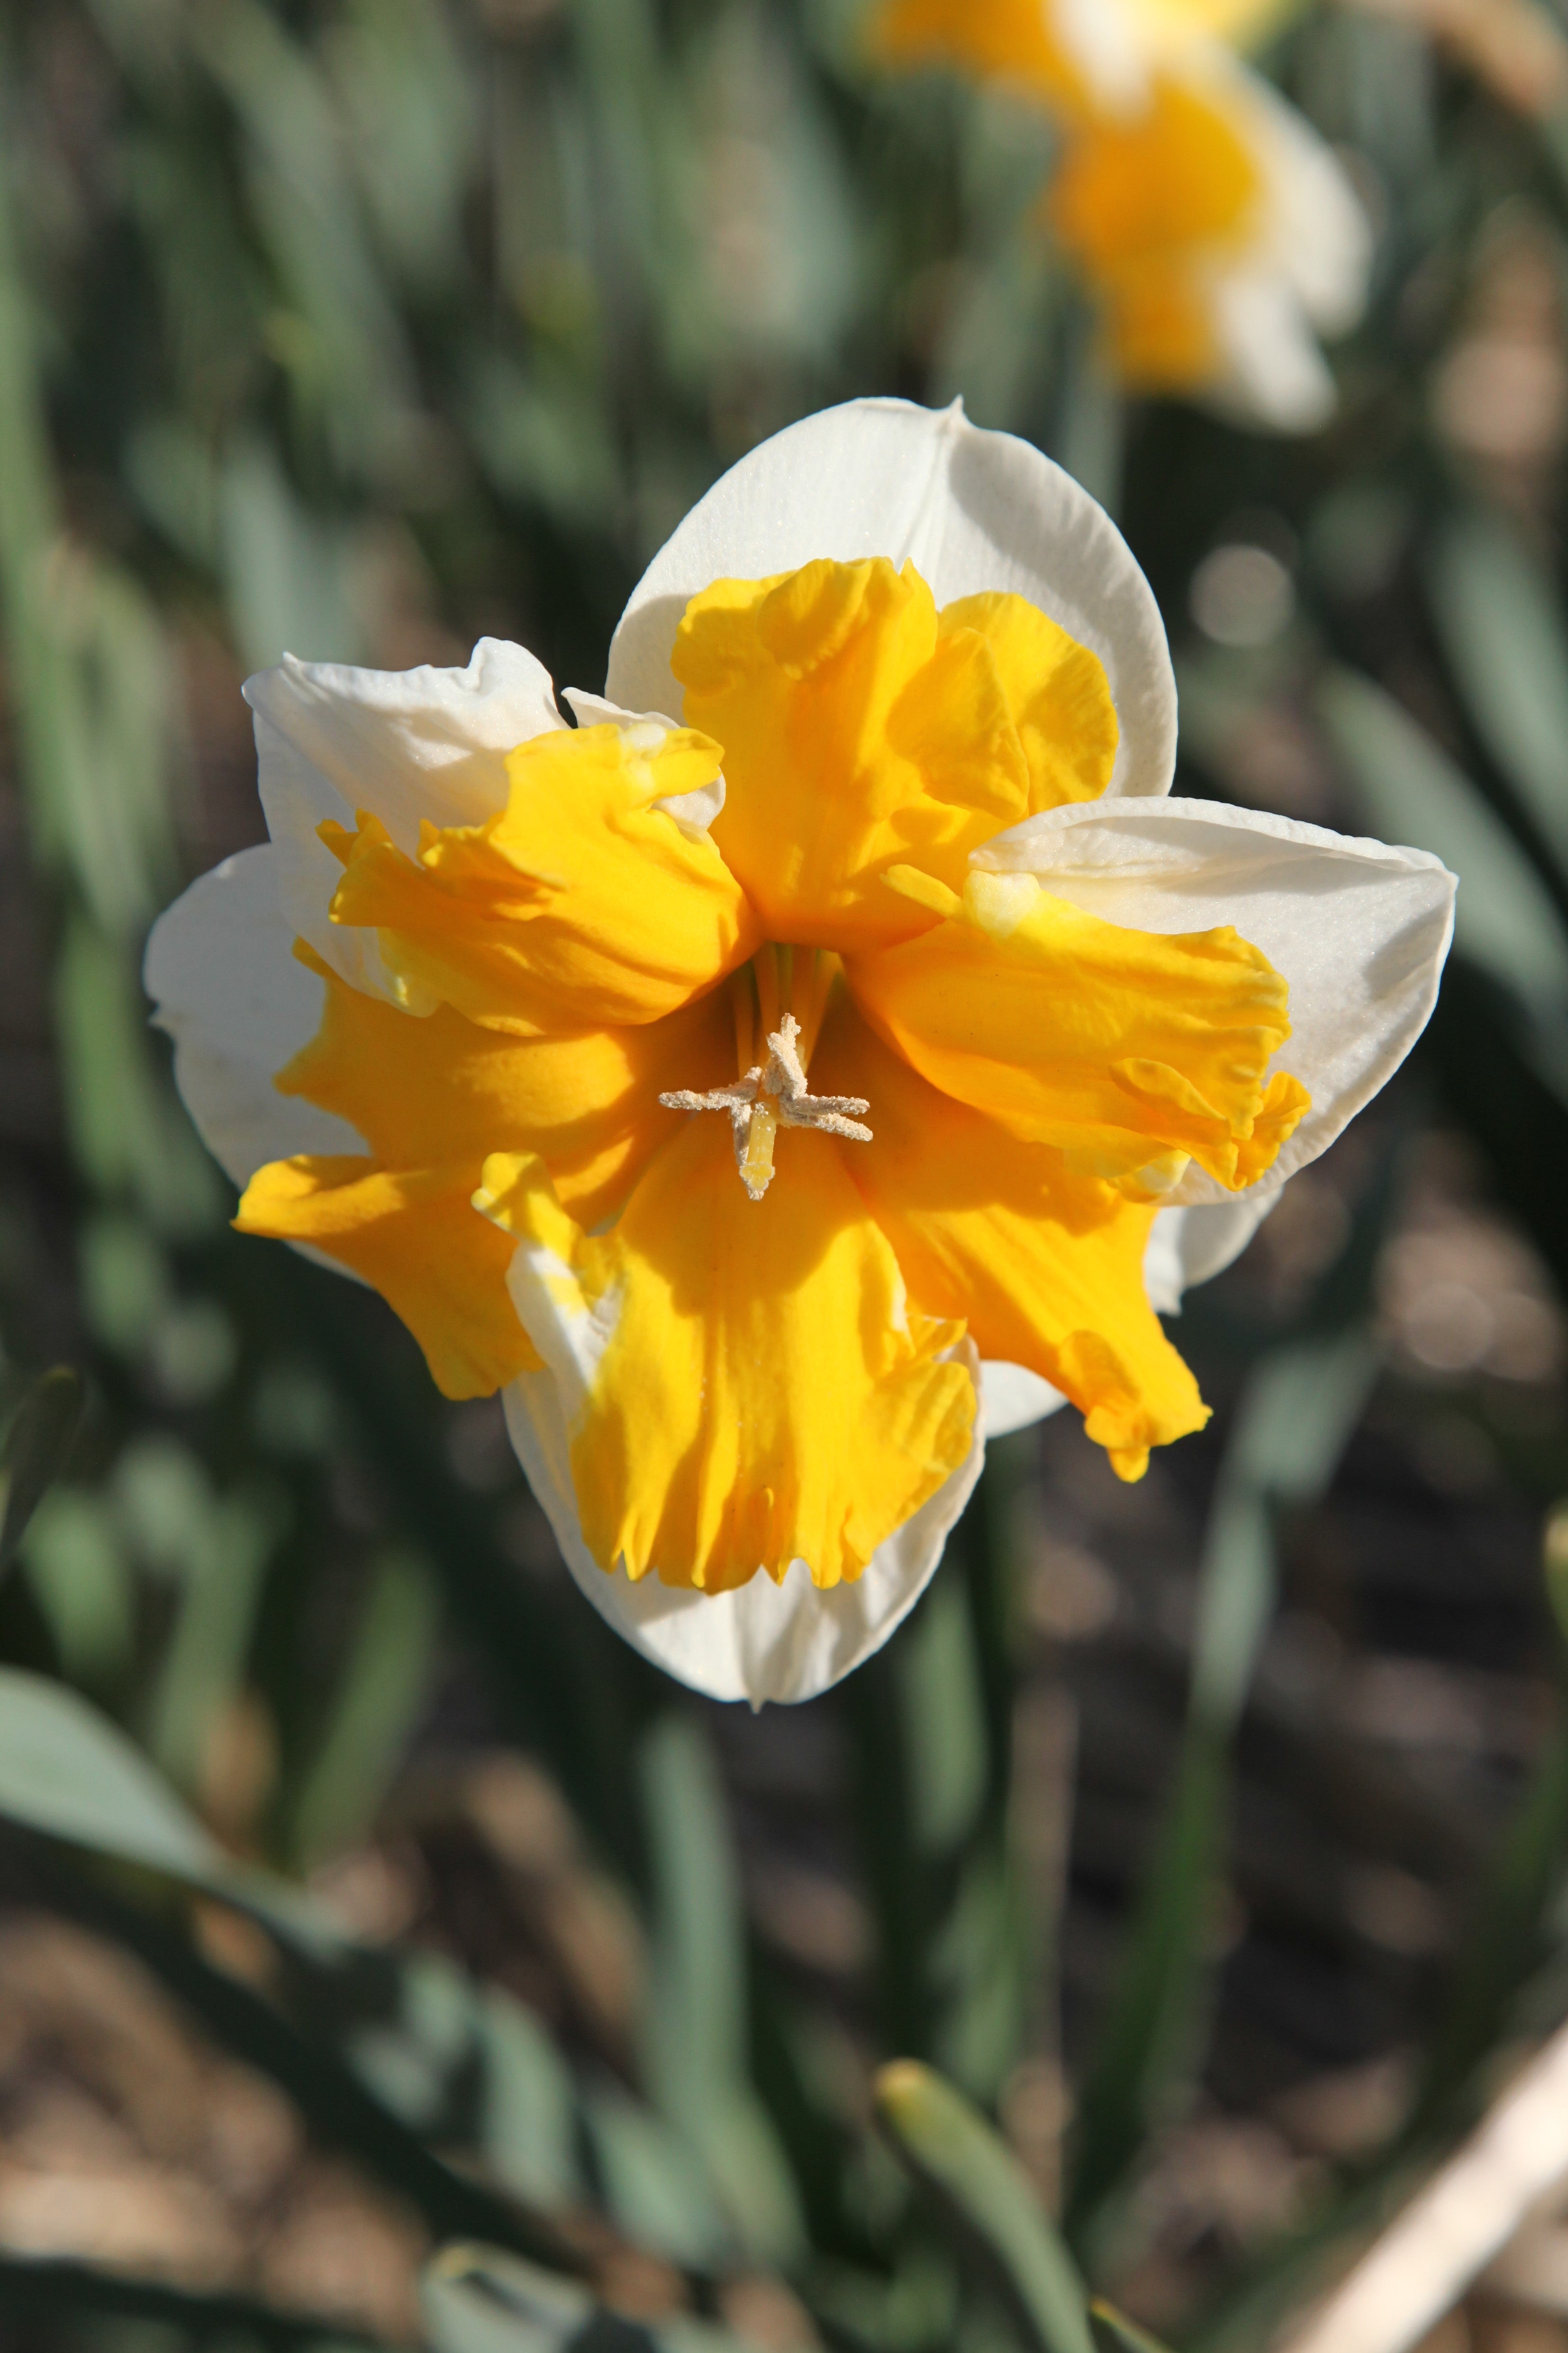 Close-up of Orange Daffodil with white petals, orange cup, green foliage